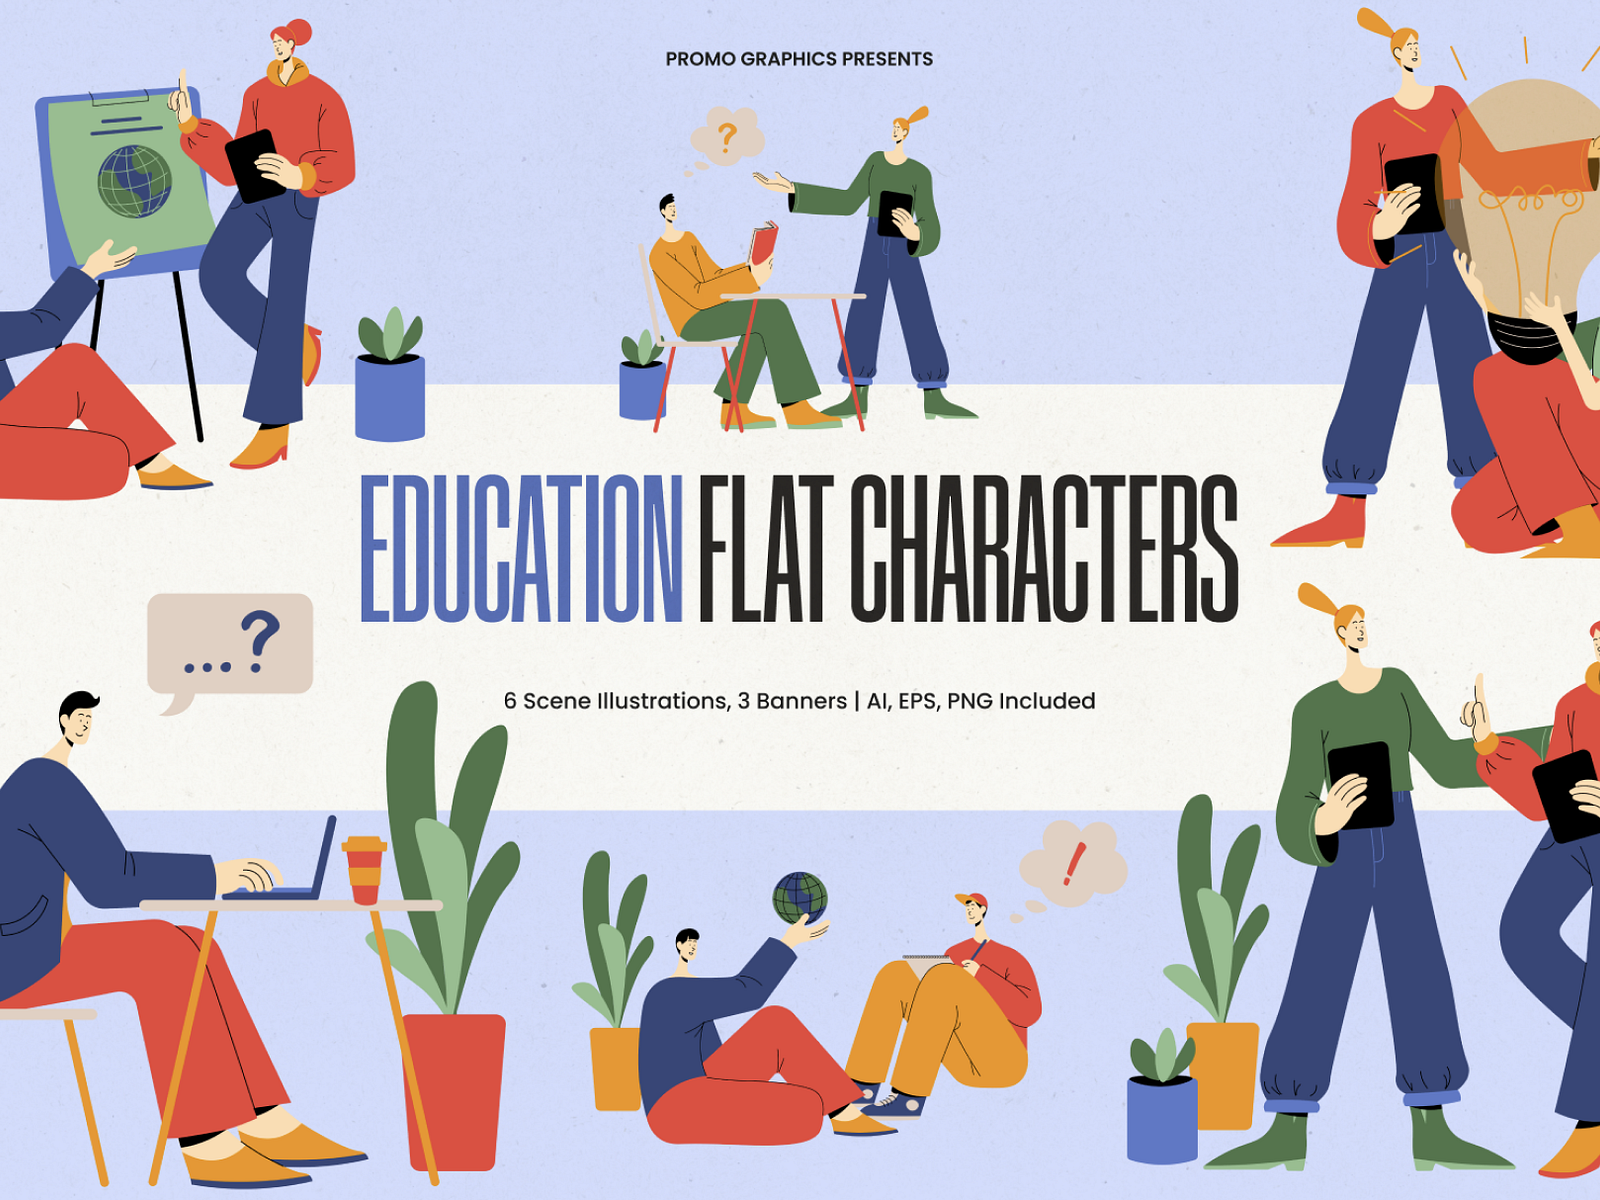 Education Flat Characters by Promo Graphics on Dribbble